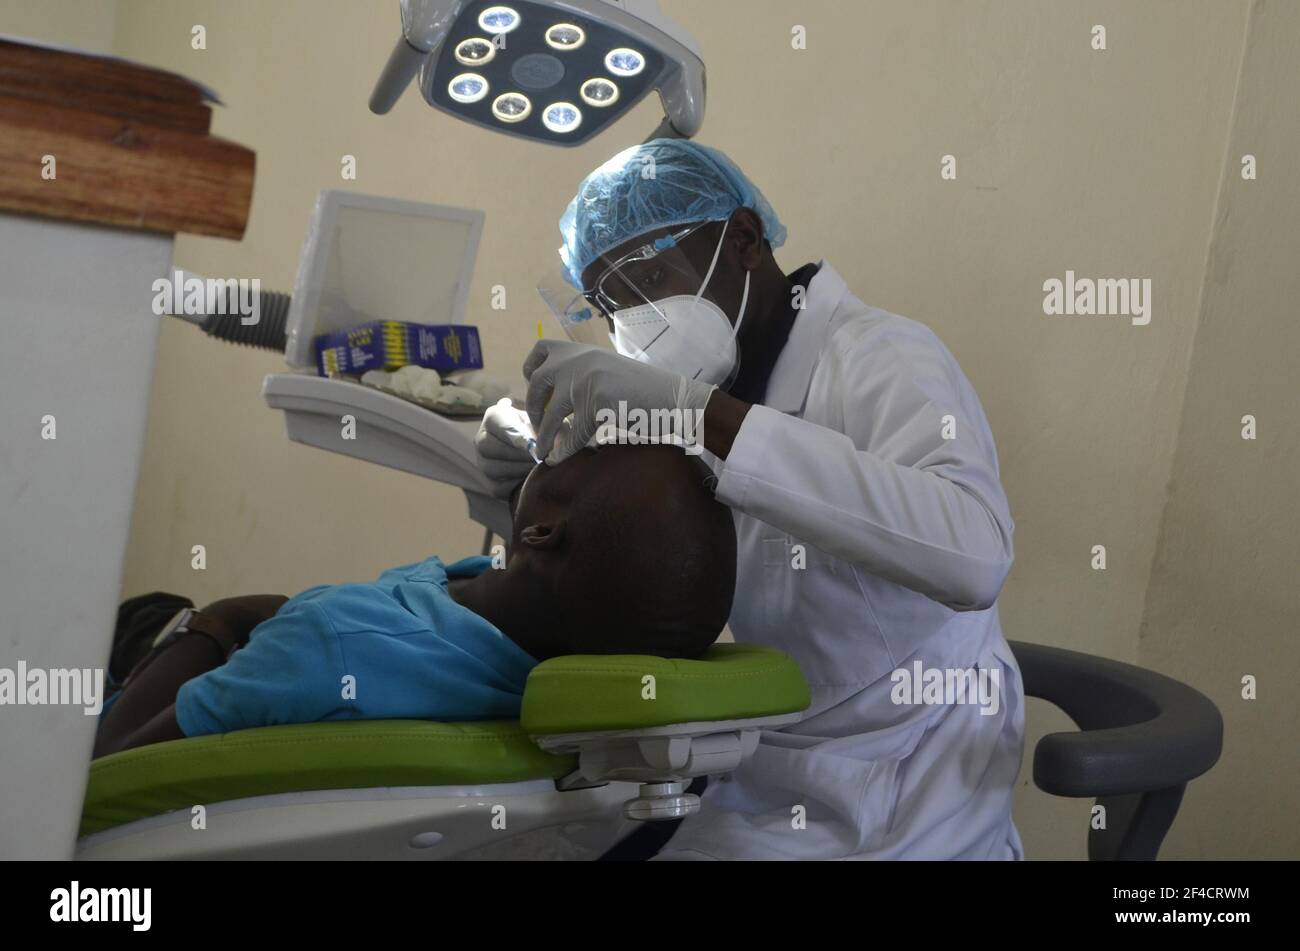 (210320) -- KAMPALA, March 20, 2021 (Xinhua) -- A health worker treats a patient during a free dental clinic event held to mark the World Oral Health Day at Makerere University in Kampala, Uganda, March 20, 2021. World Oral Health Day is celebrated every year on March 20 to promote worldwide awareness of oral diseases and the importance of oral hygiene. (Photo by Nicholas Kajoba/Xinhua) Stock Photo